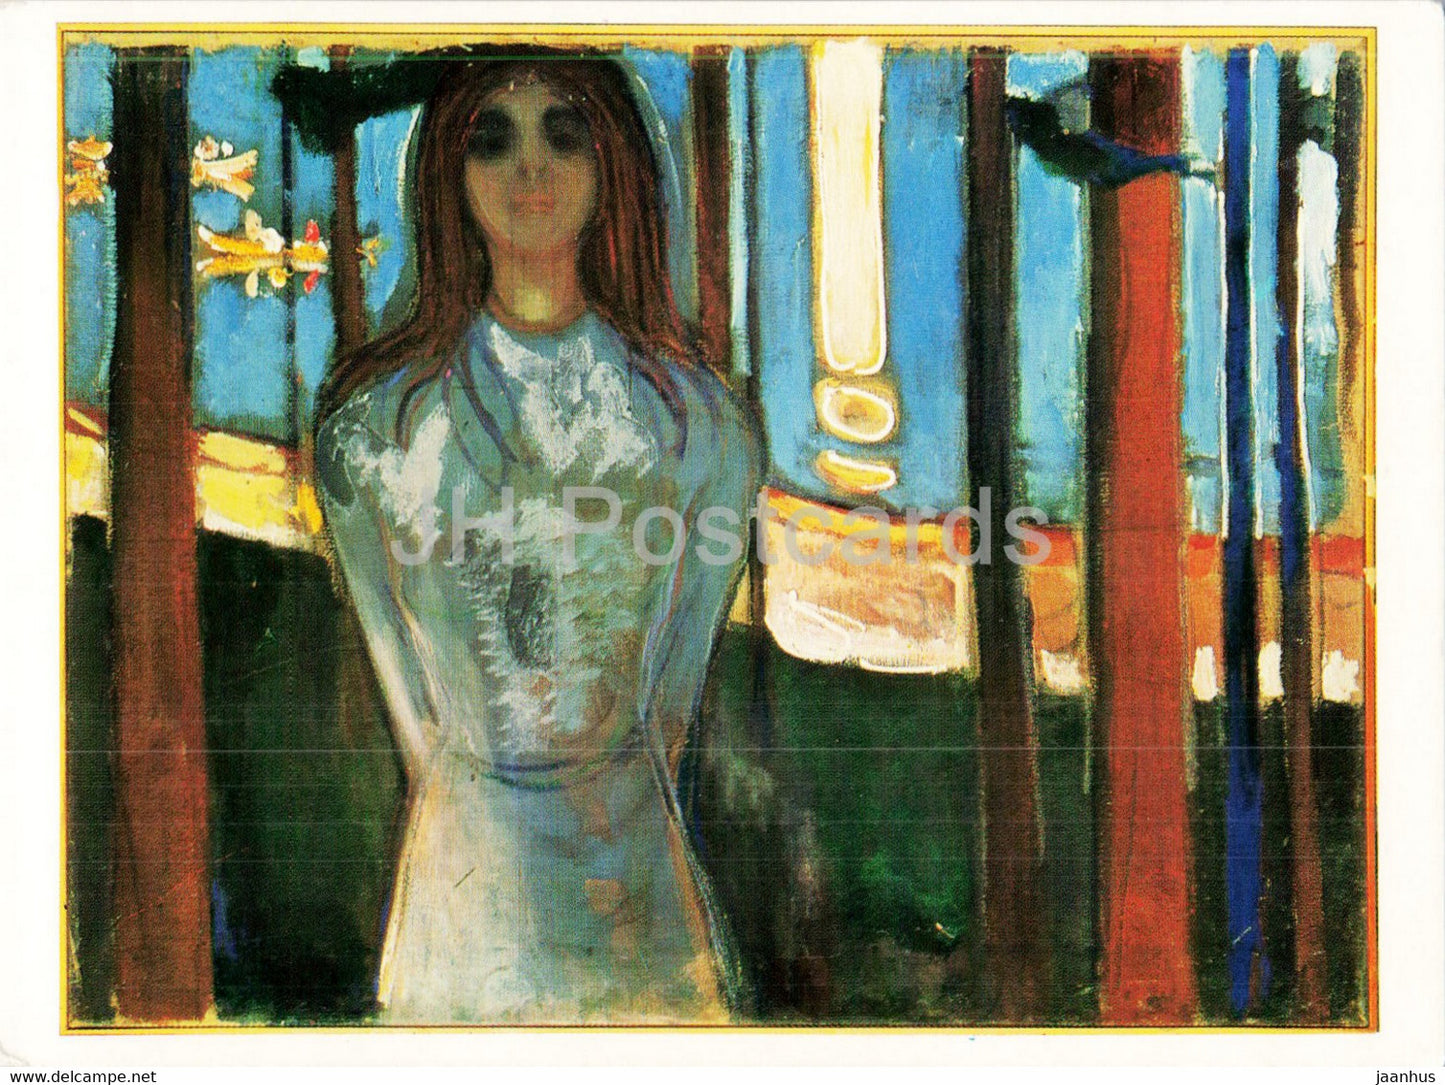 painting by Edvard Munch - The Voice - Die Stimme - Norwegian art - Norway - unused - JH Postcards